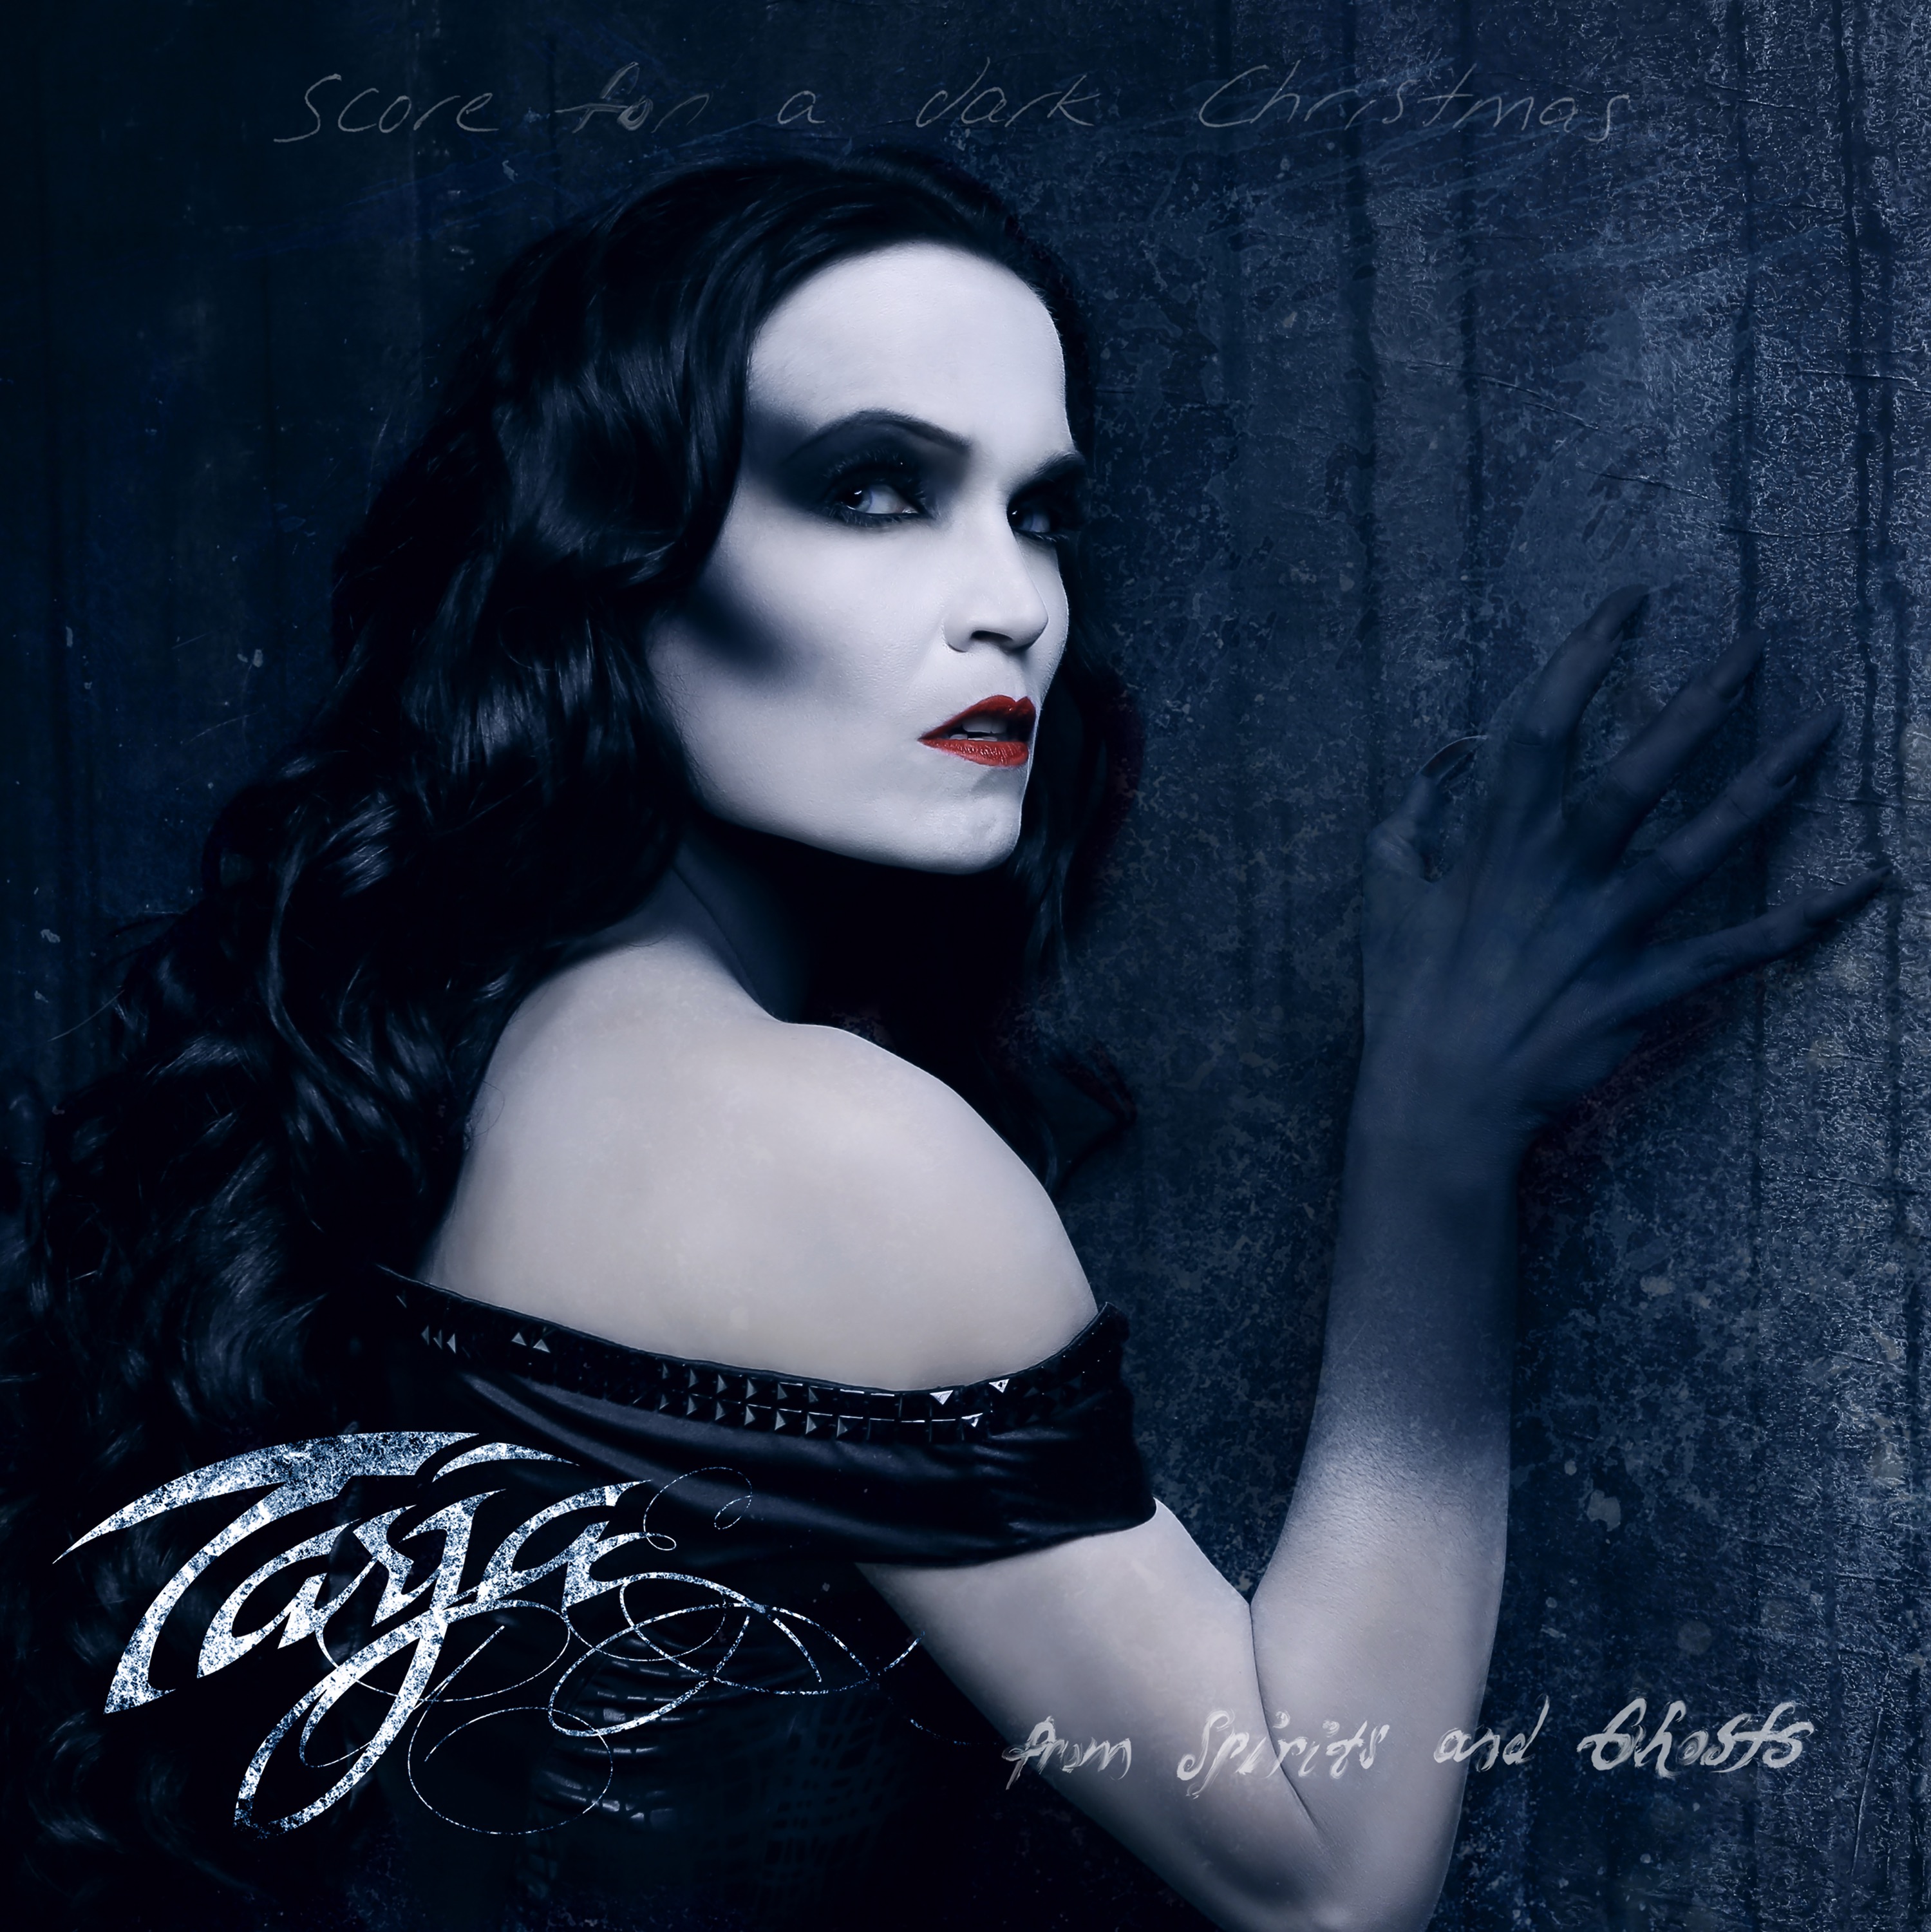 Tarja Turunen - From Spirits And Ghosts (Score For - 2xCD